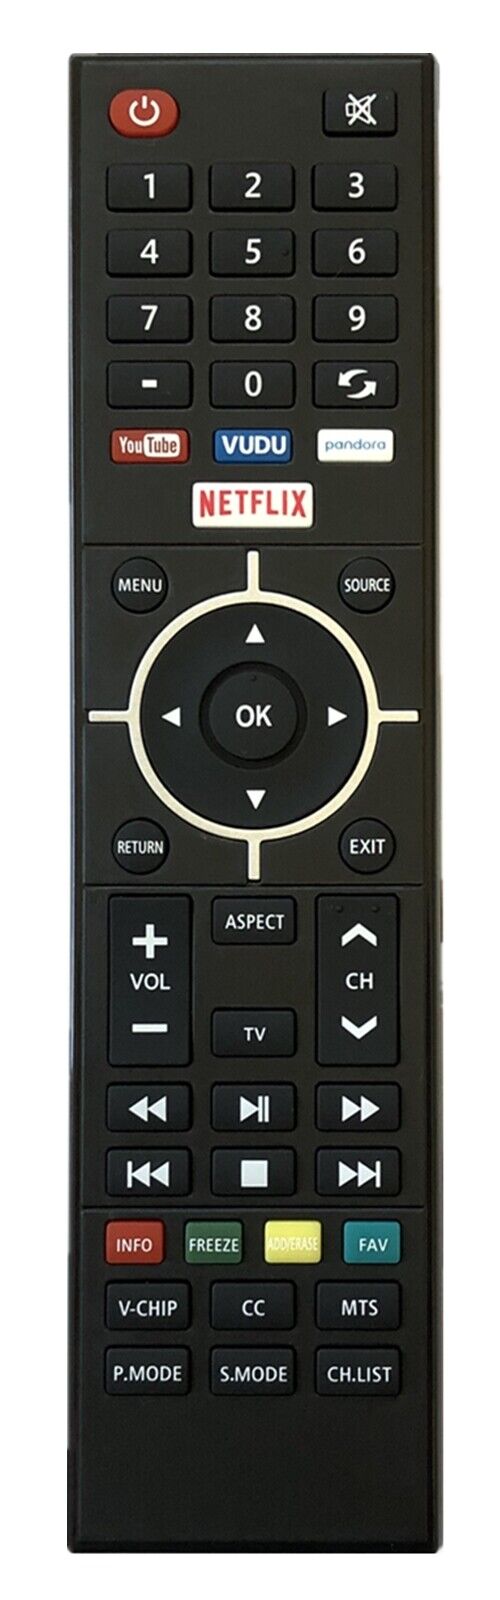 New Element KY49C178F TV Replace Remote Control E2SW3918, VUDU NETFLIX and YOUTUBE